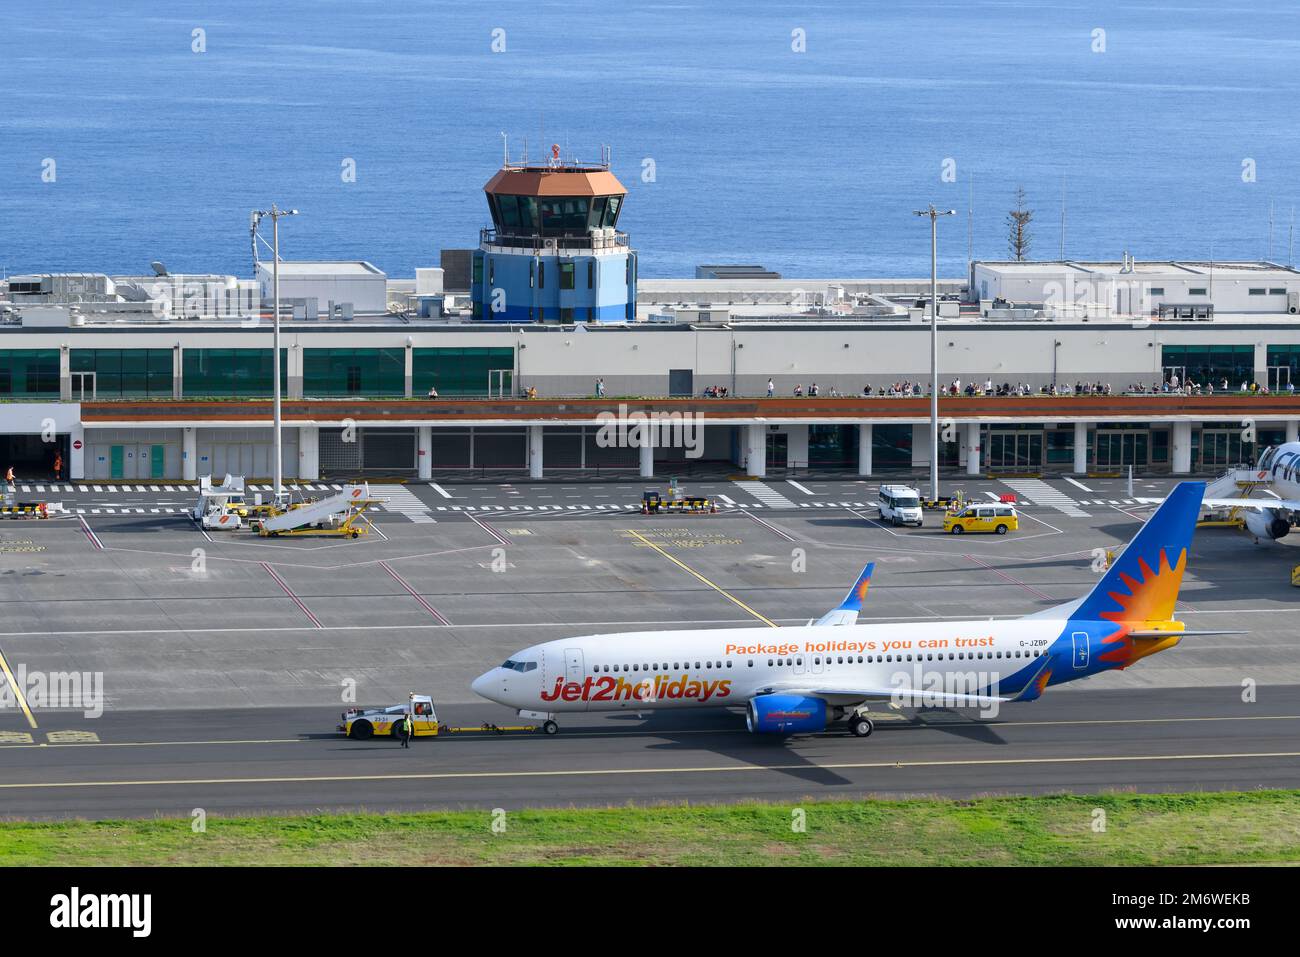 Funchal Airport passengers terminal exterior view. Madeira Airport air traffic control tower (Atc tower) and open air observation deck. Stock Photo